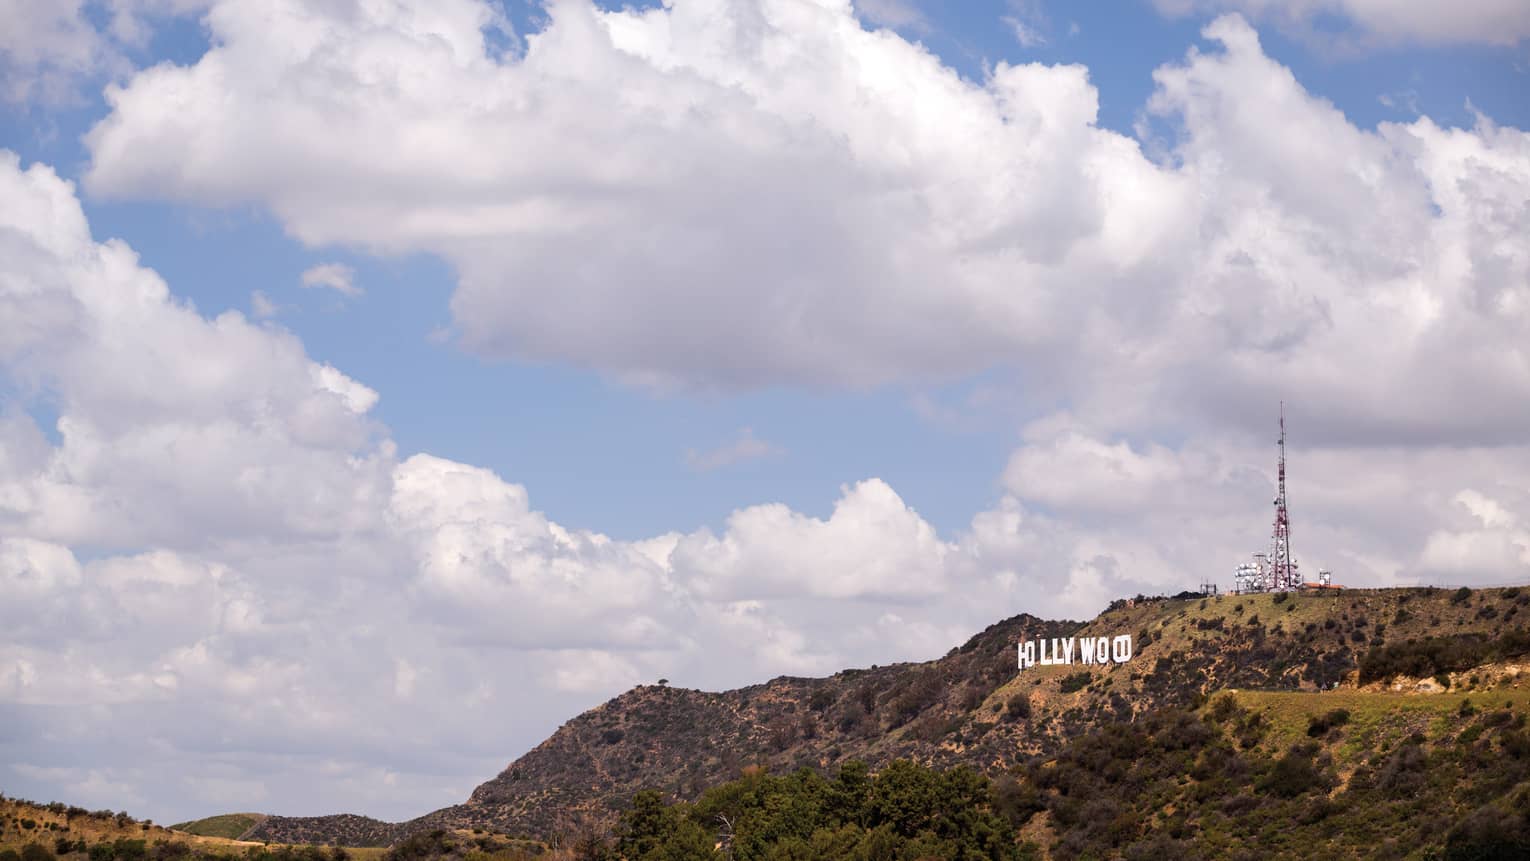 Hollywood sign on green Los Angeles hills against blue sky